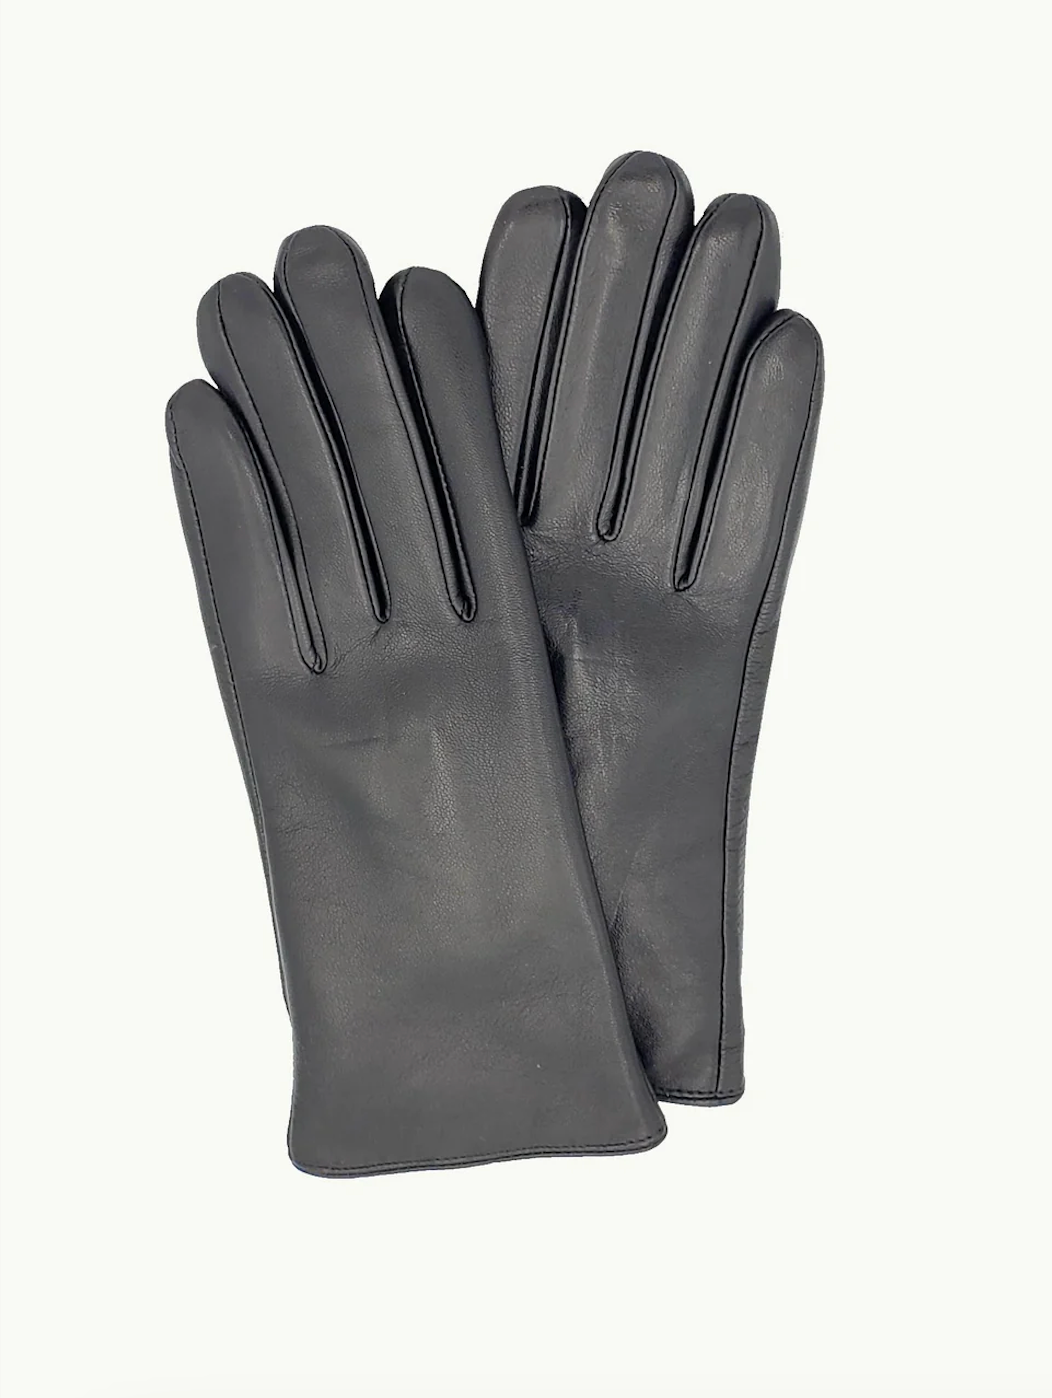 Albee Thinsulate Leather Gloves Black K103C